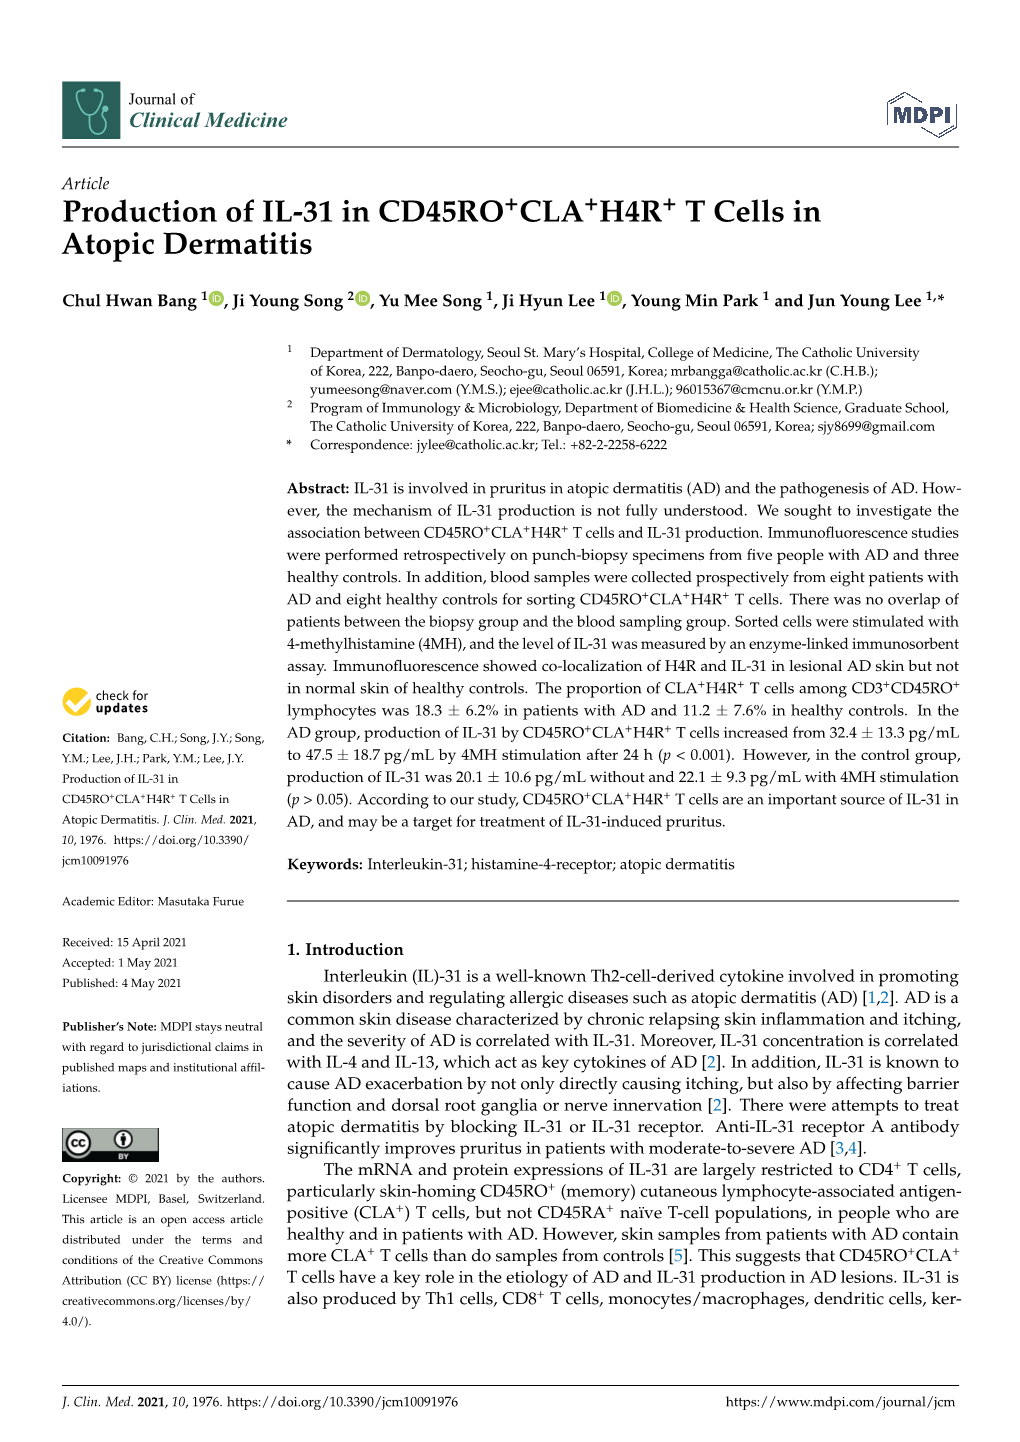 Production of IL-31 in CD45RO+CLA+H4R+ T Cells in Atopic Dermatitis